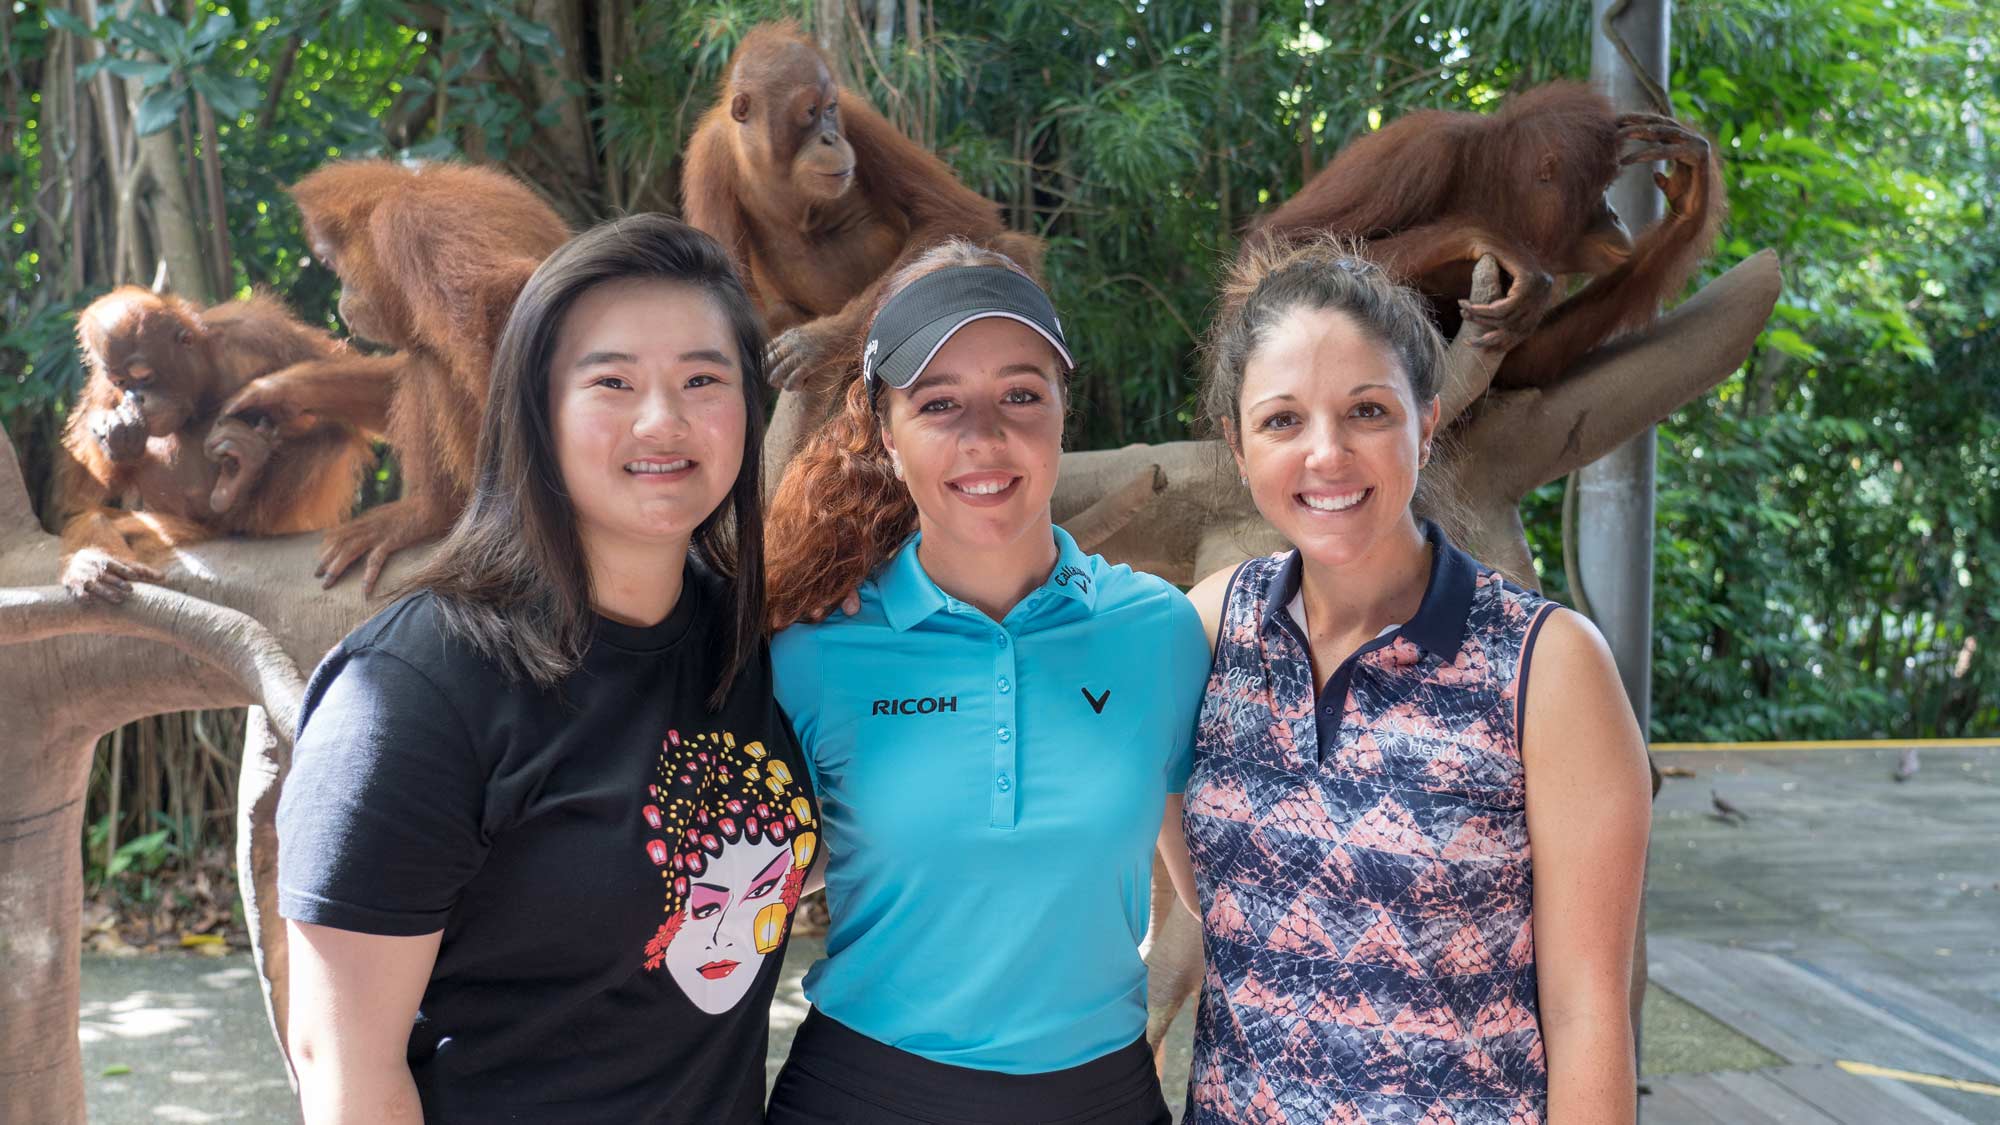 Angel Yin, Georgia Hall and Emma Talley visit with orangutans at the zoo after their opening practice round February 26th, 2019.